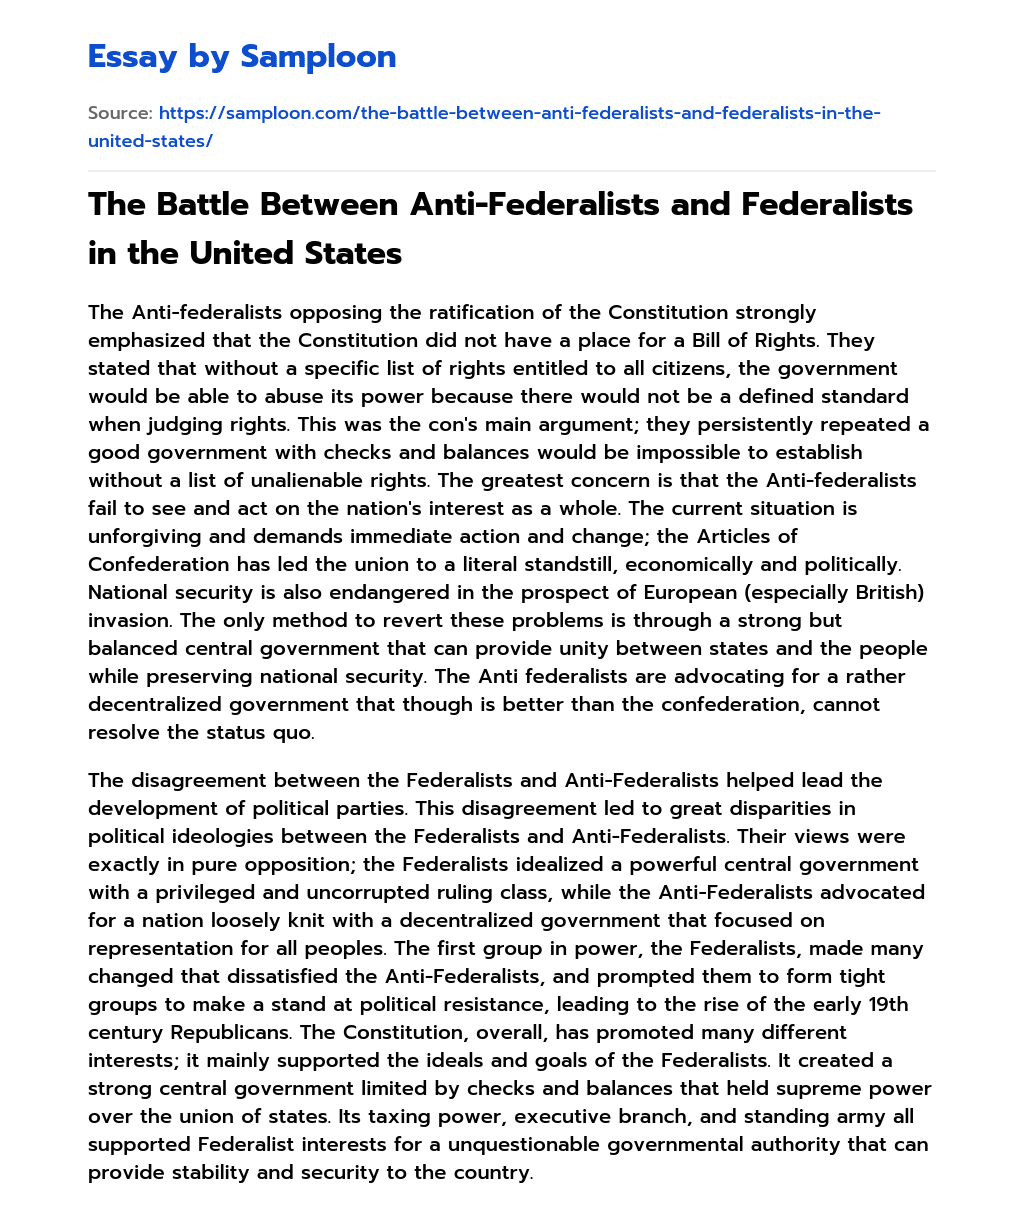 The Battle Between Anti-Federalists and Federalists in the United States essay